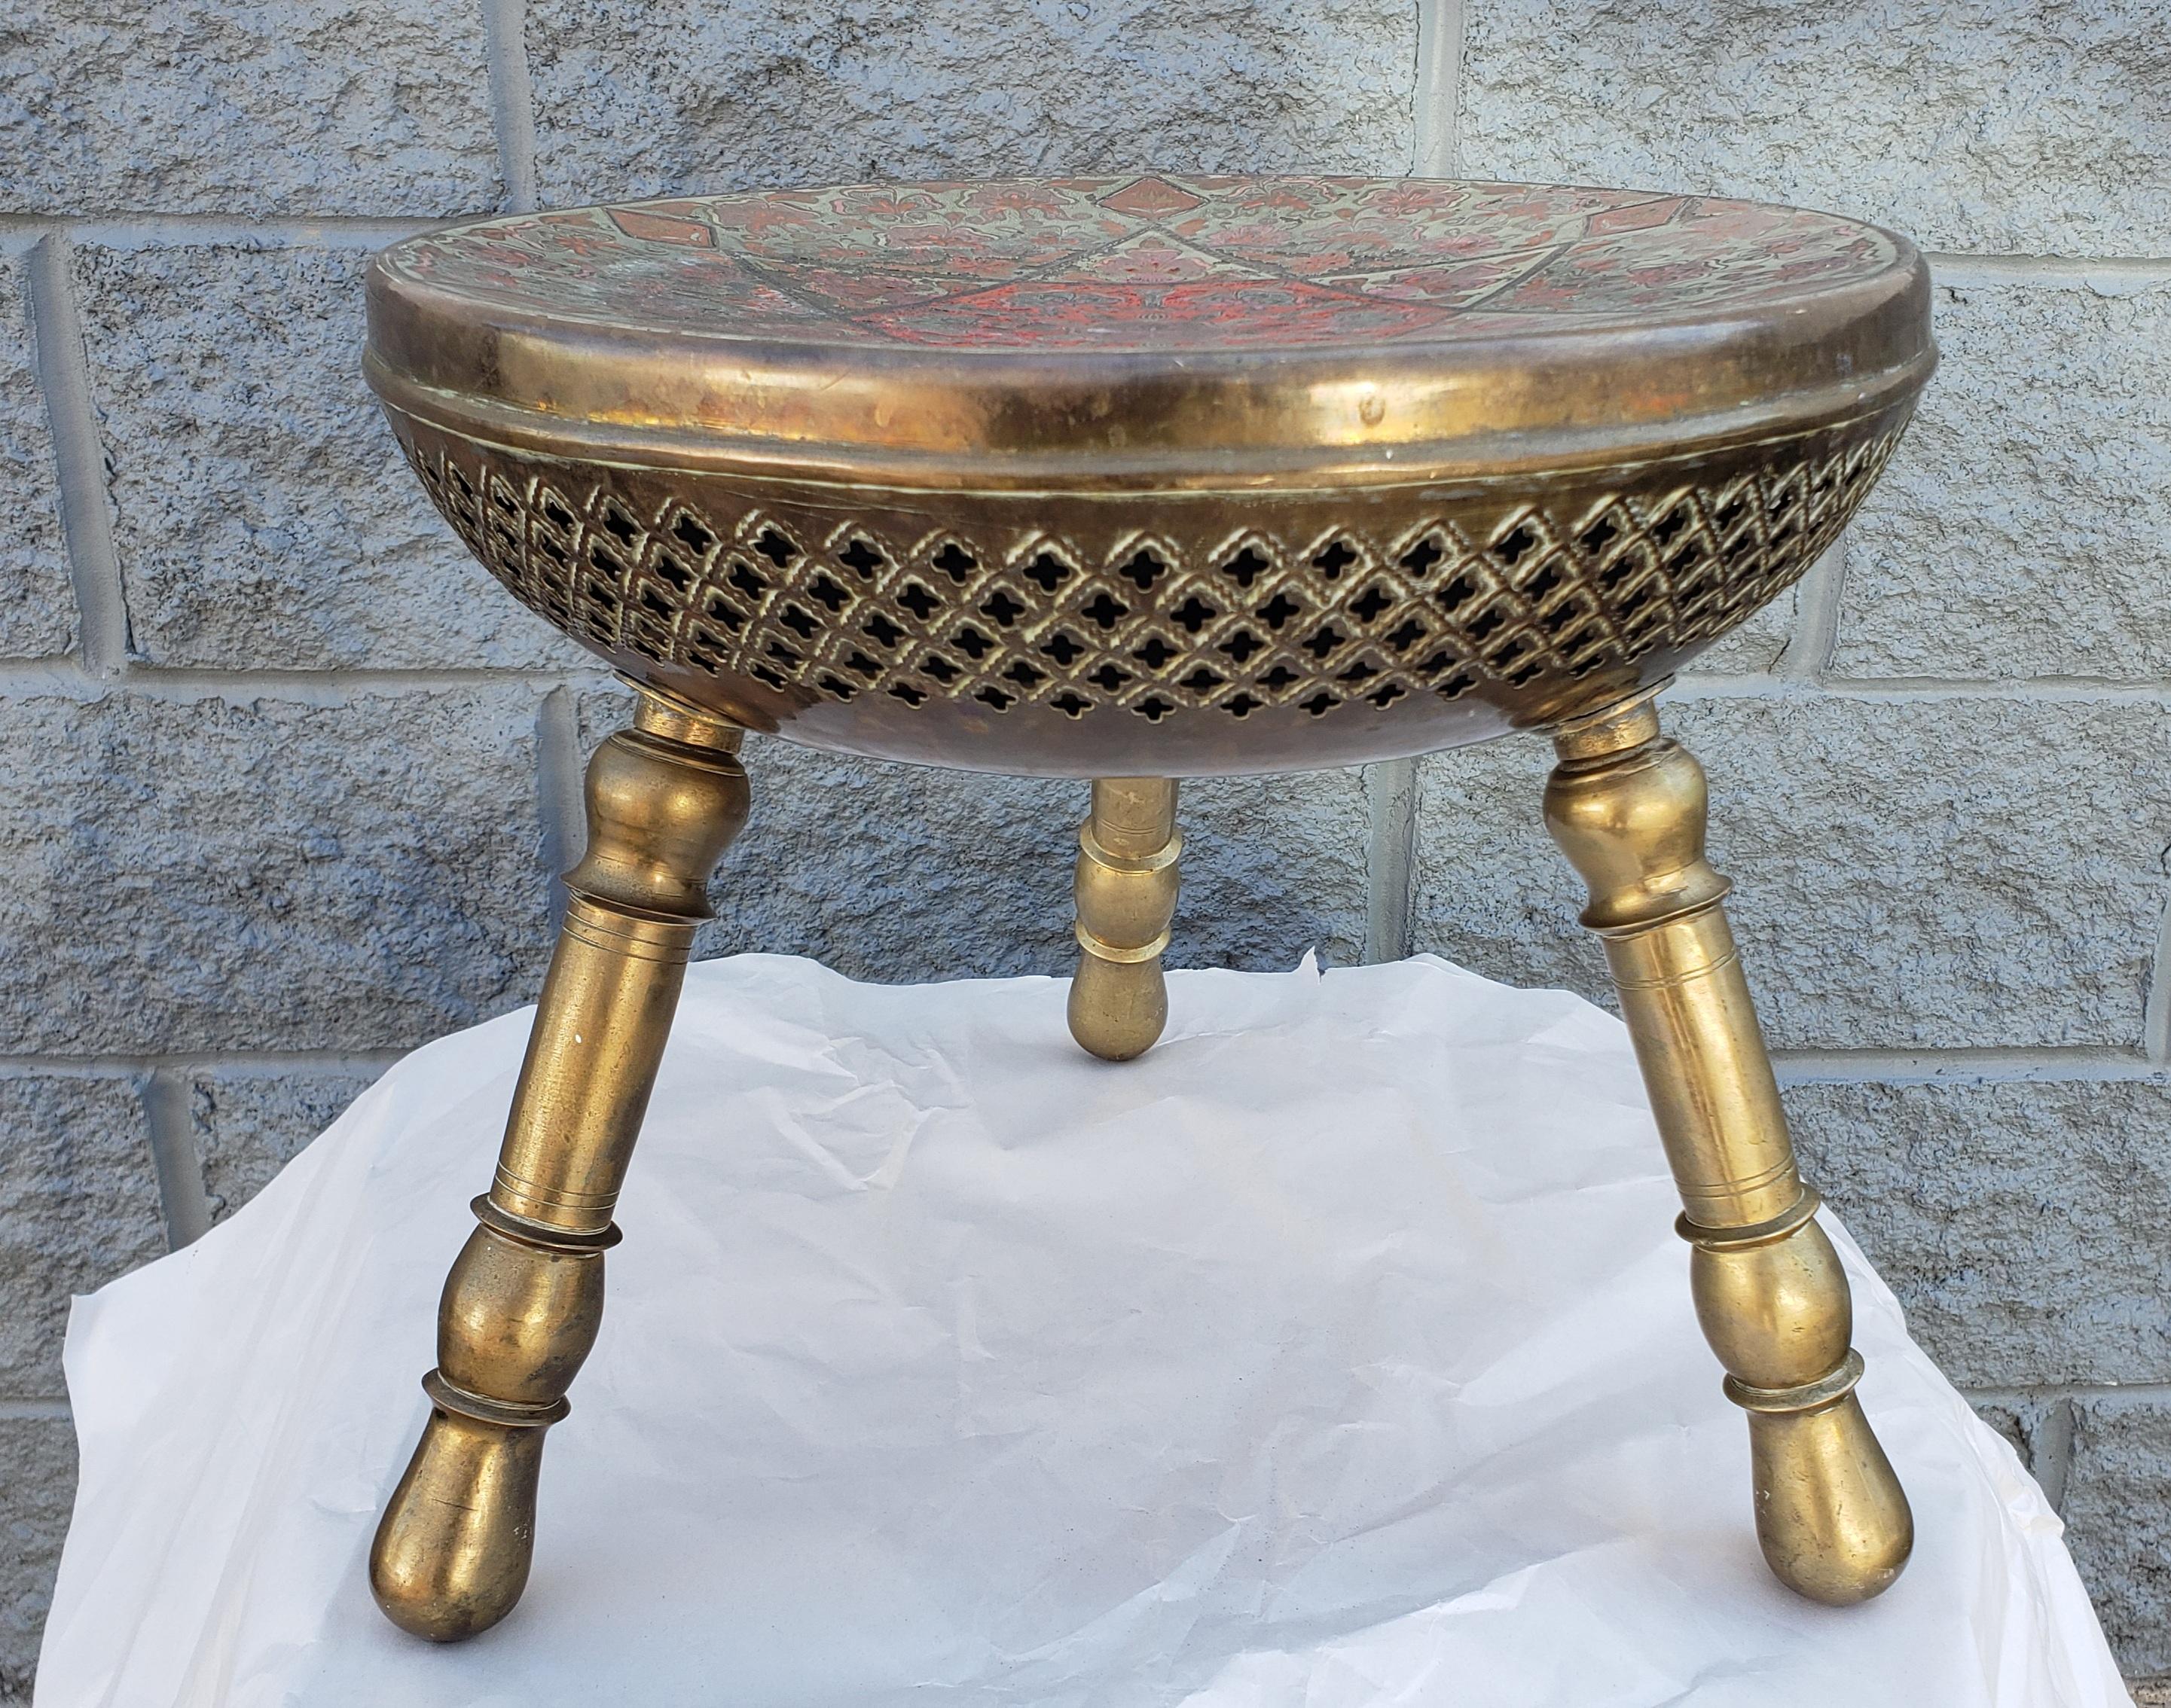 Indian Repoussé & Engraved Brass Bowl / Planter on Engraved Brass Stand / Stool For Sale 8